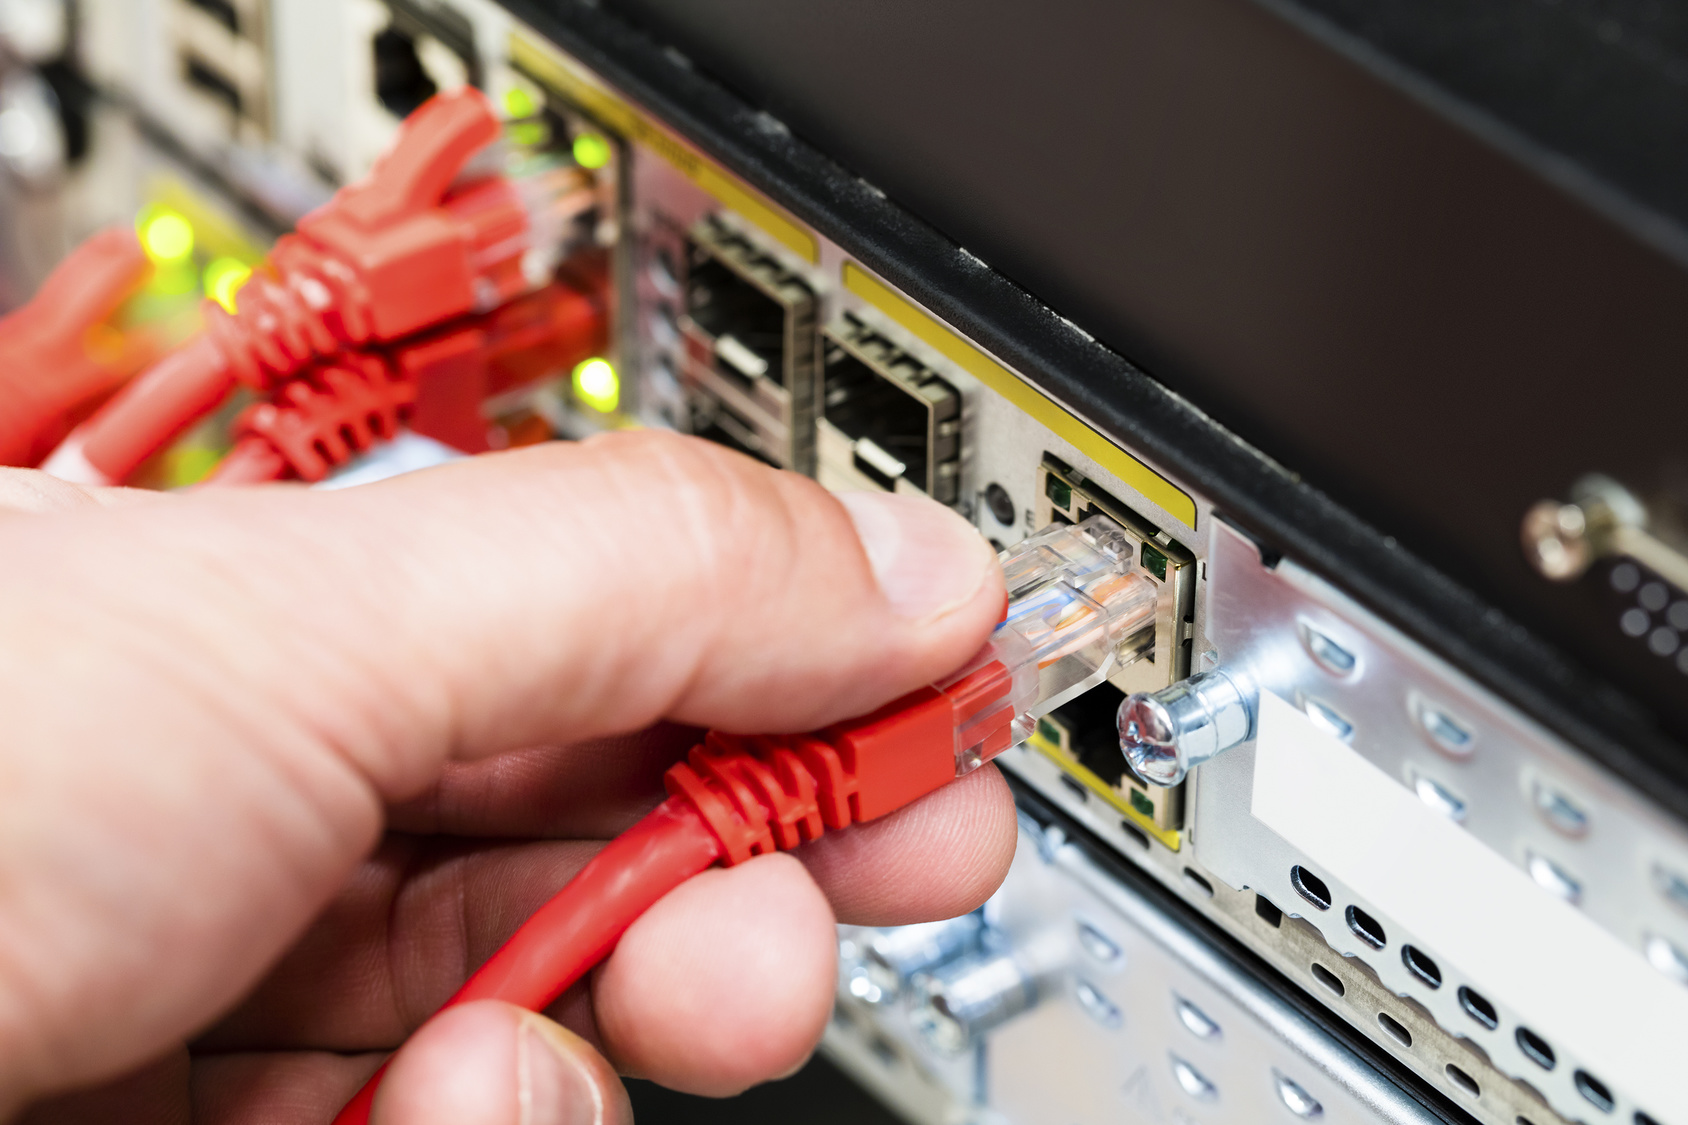 Hand Plugging Network Cable Into Switch In Datacenter